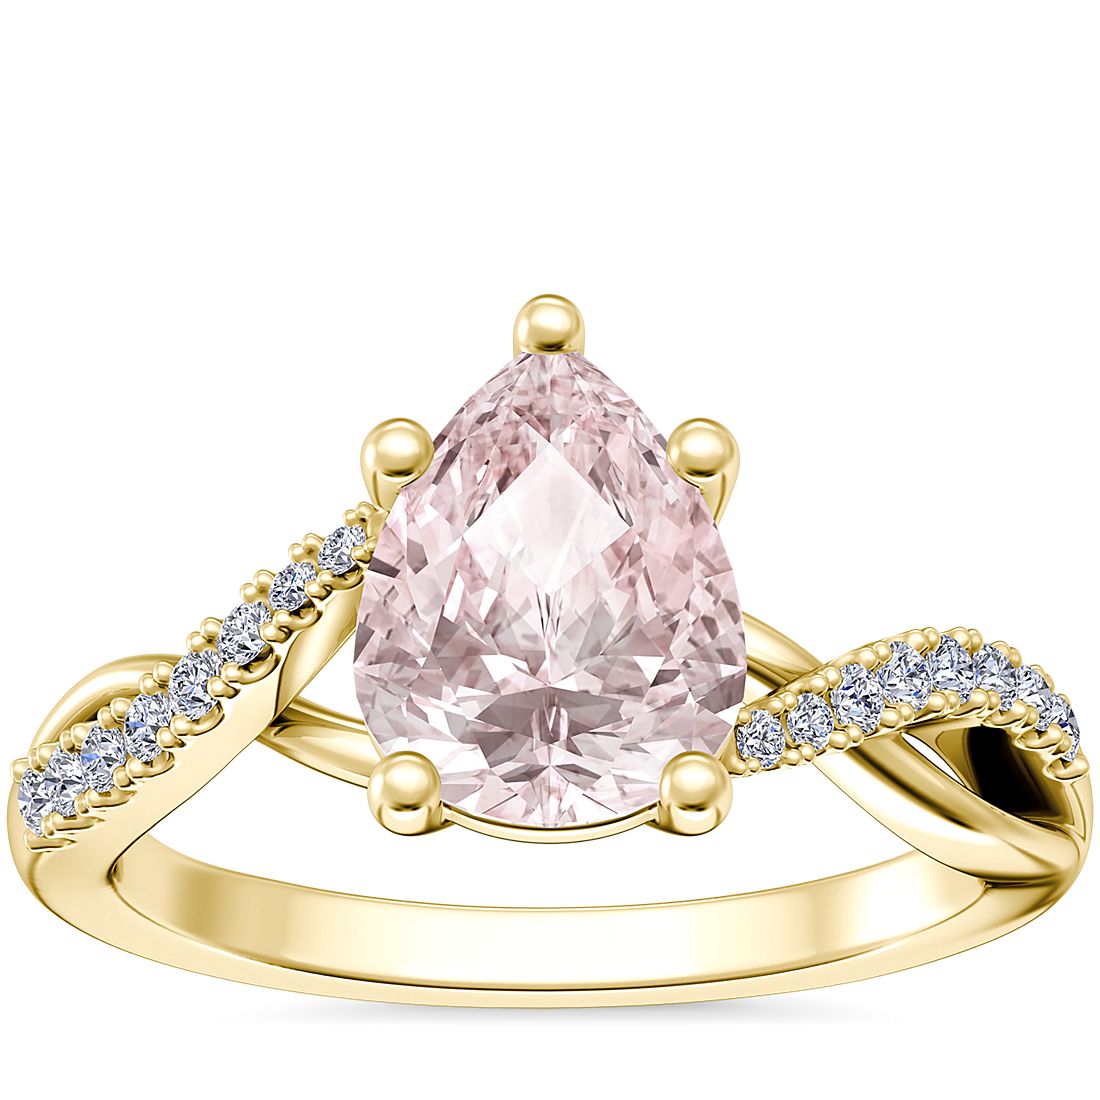 Classic Petite Twist Diamond Engagement Ring with Pear-Shaped Morganite in 18k Yellow Gold (8x6mm)